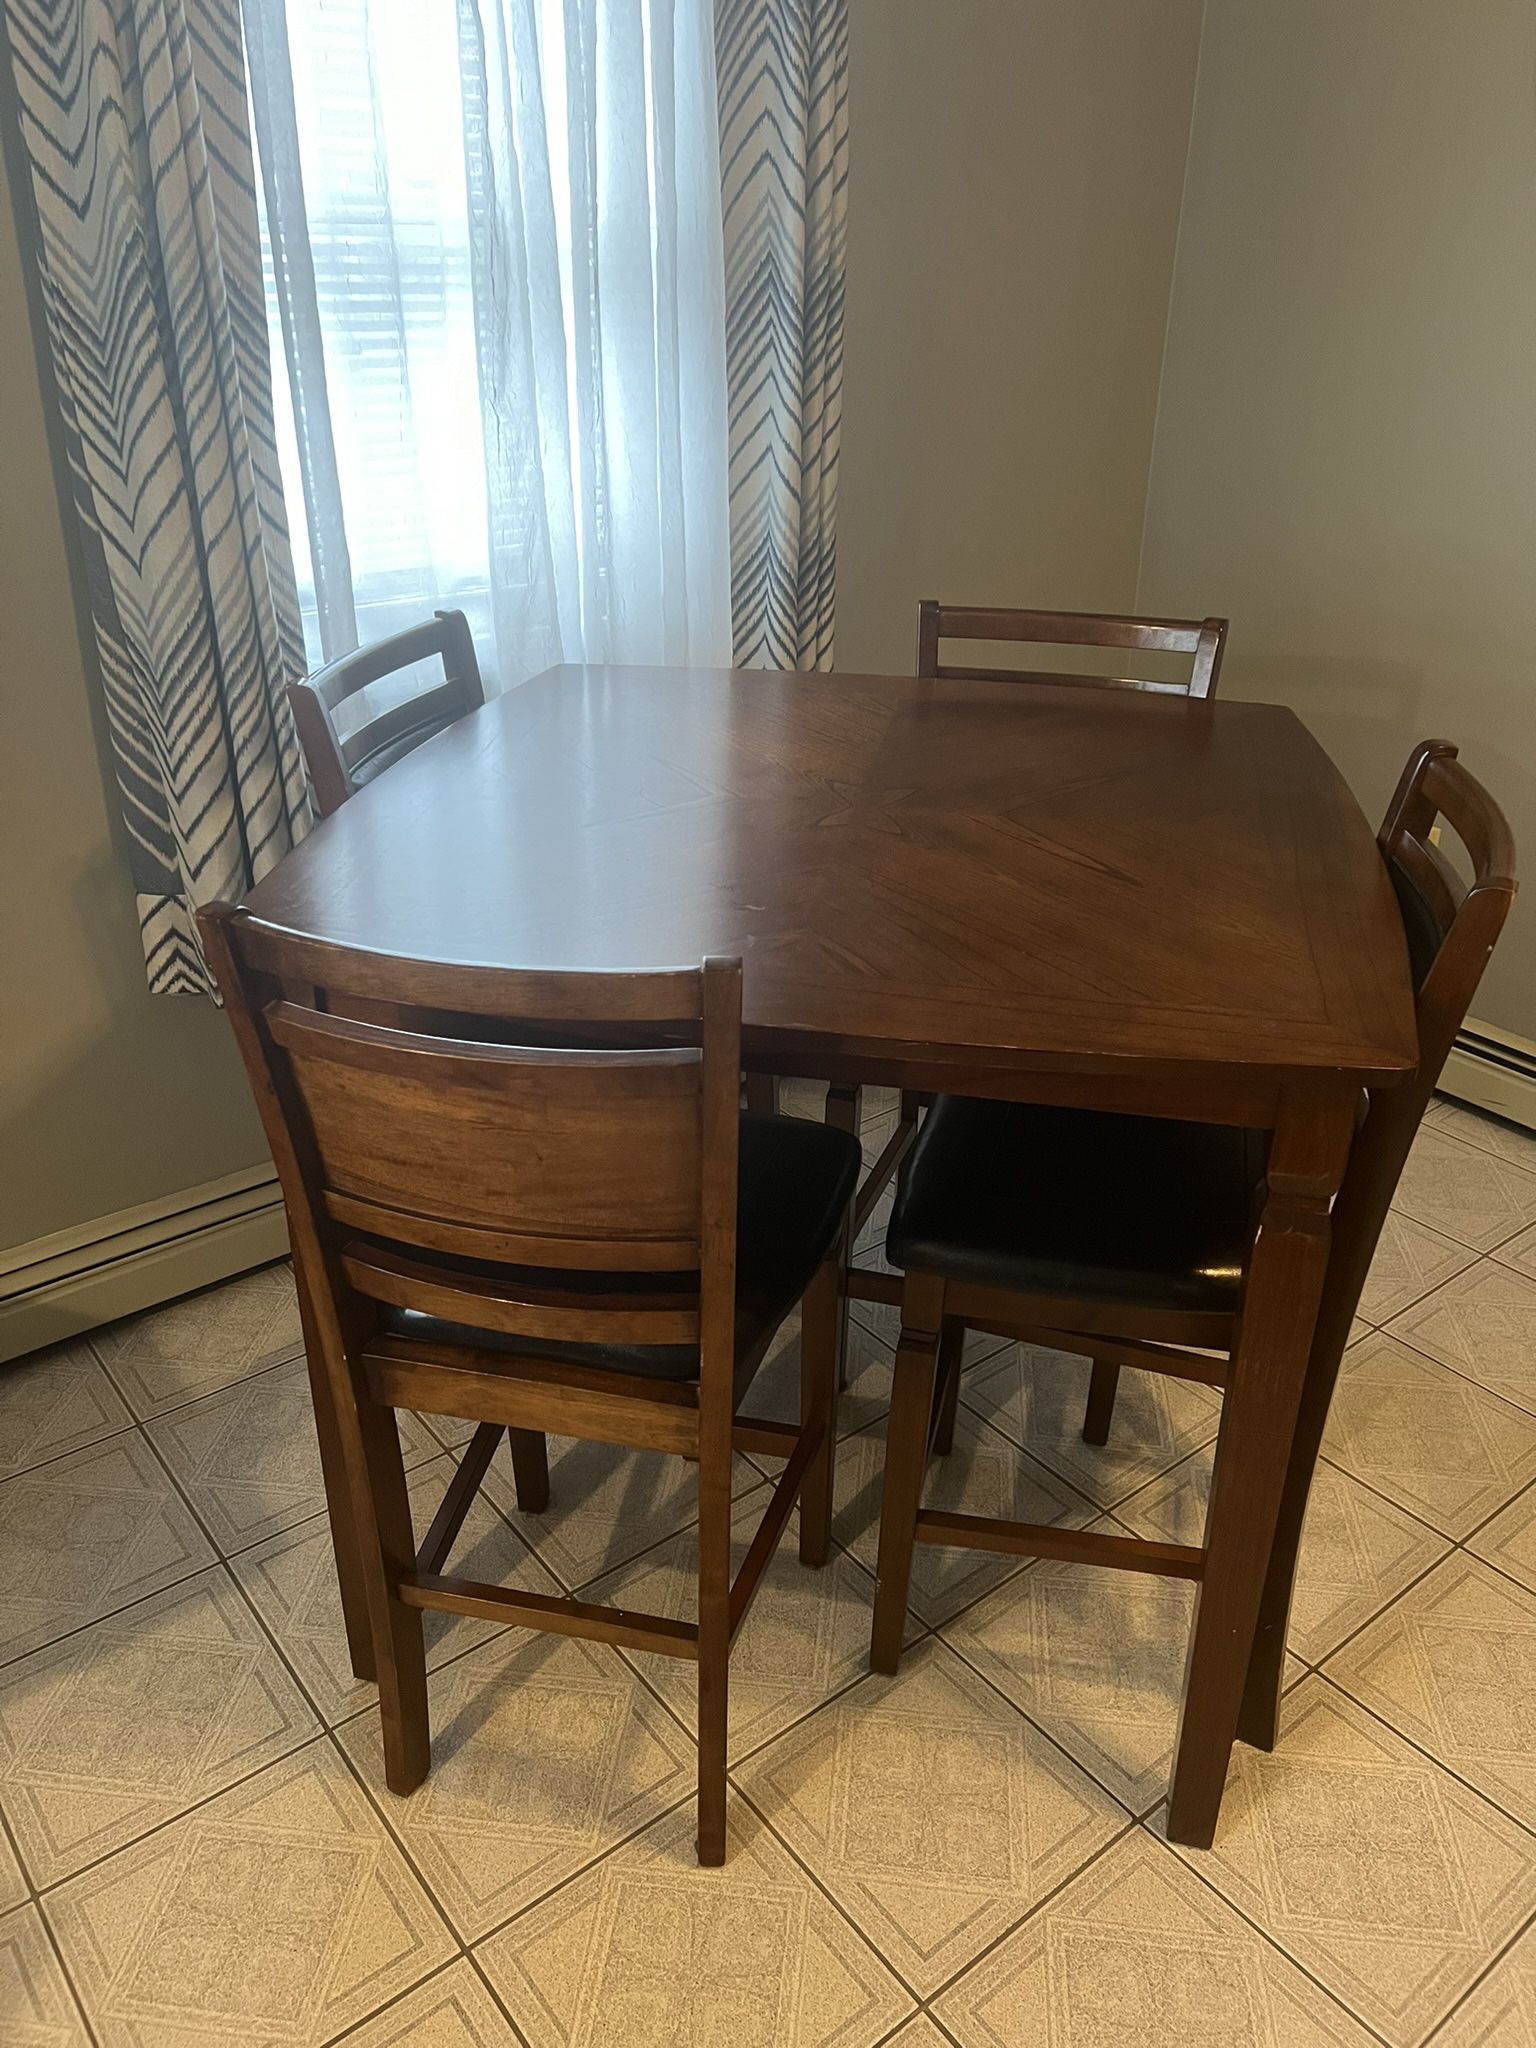 Bar Style Wood Table w/ 4 Chairs